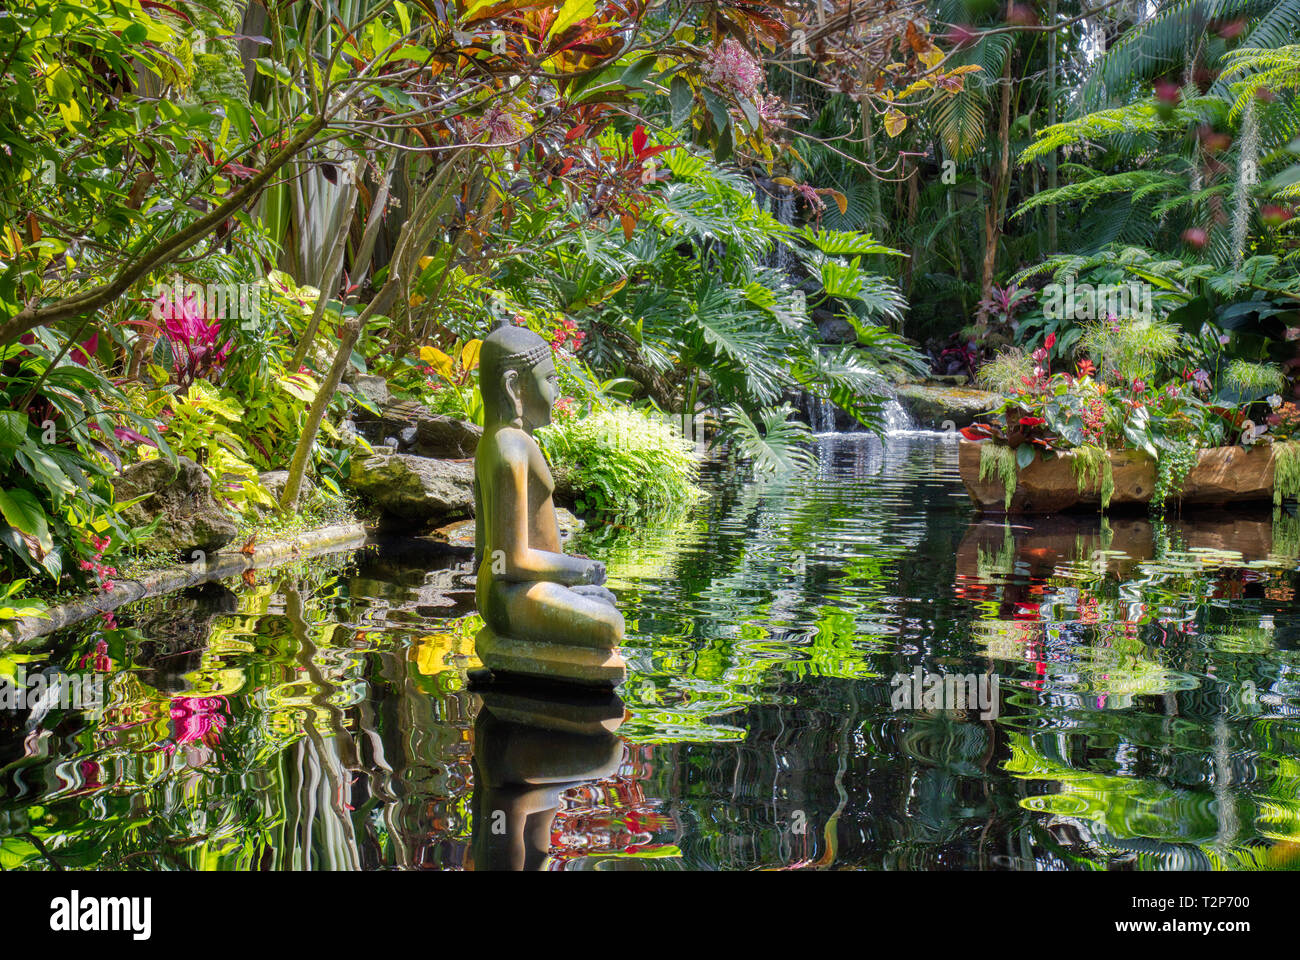 Pond In Marie Selby Botanical Gardens In Sarasota Florida Stock